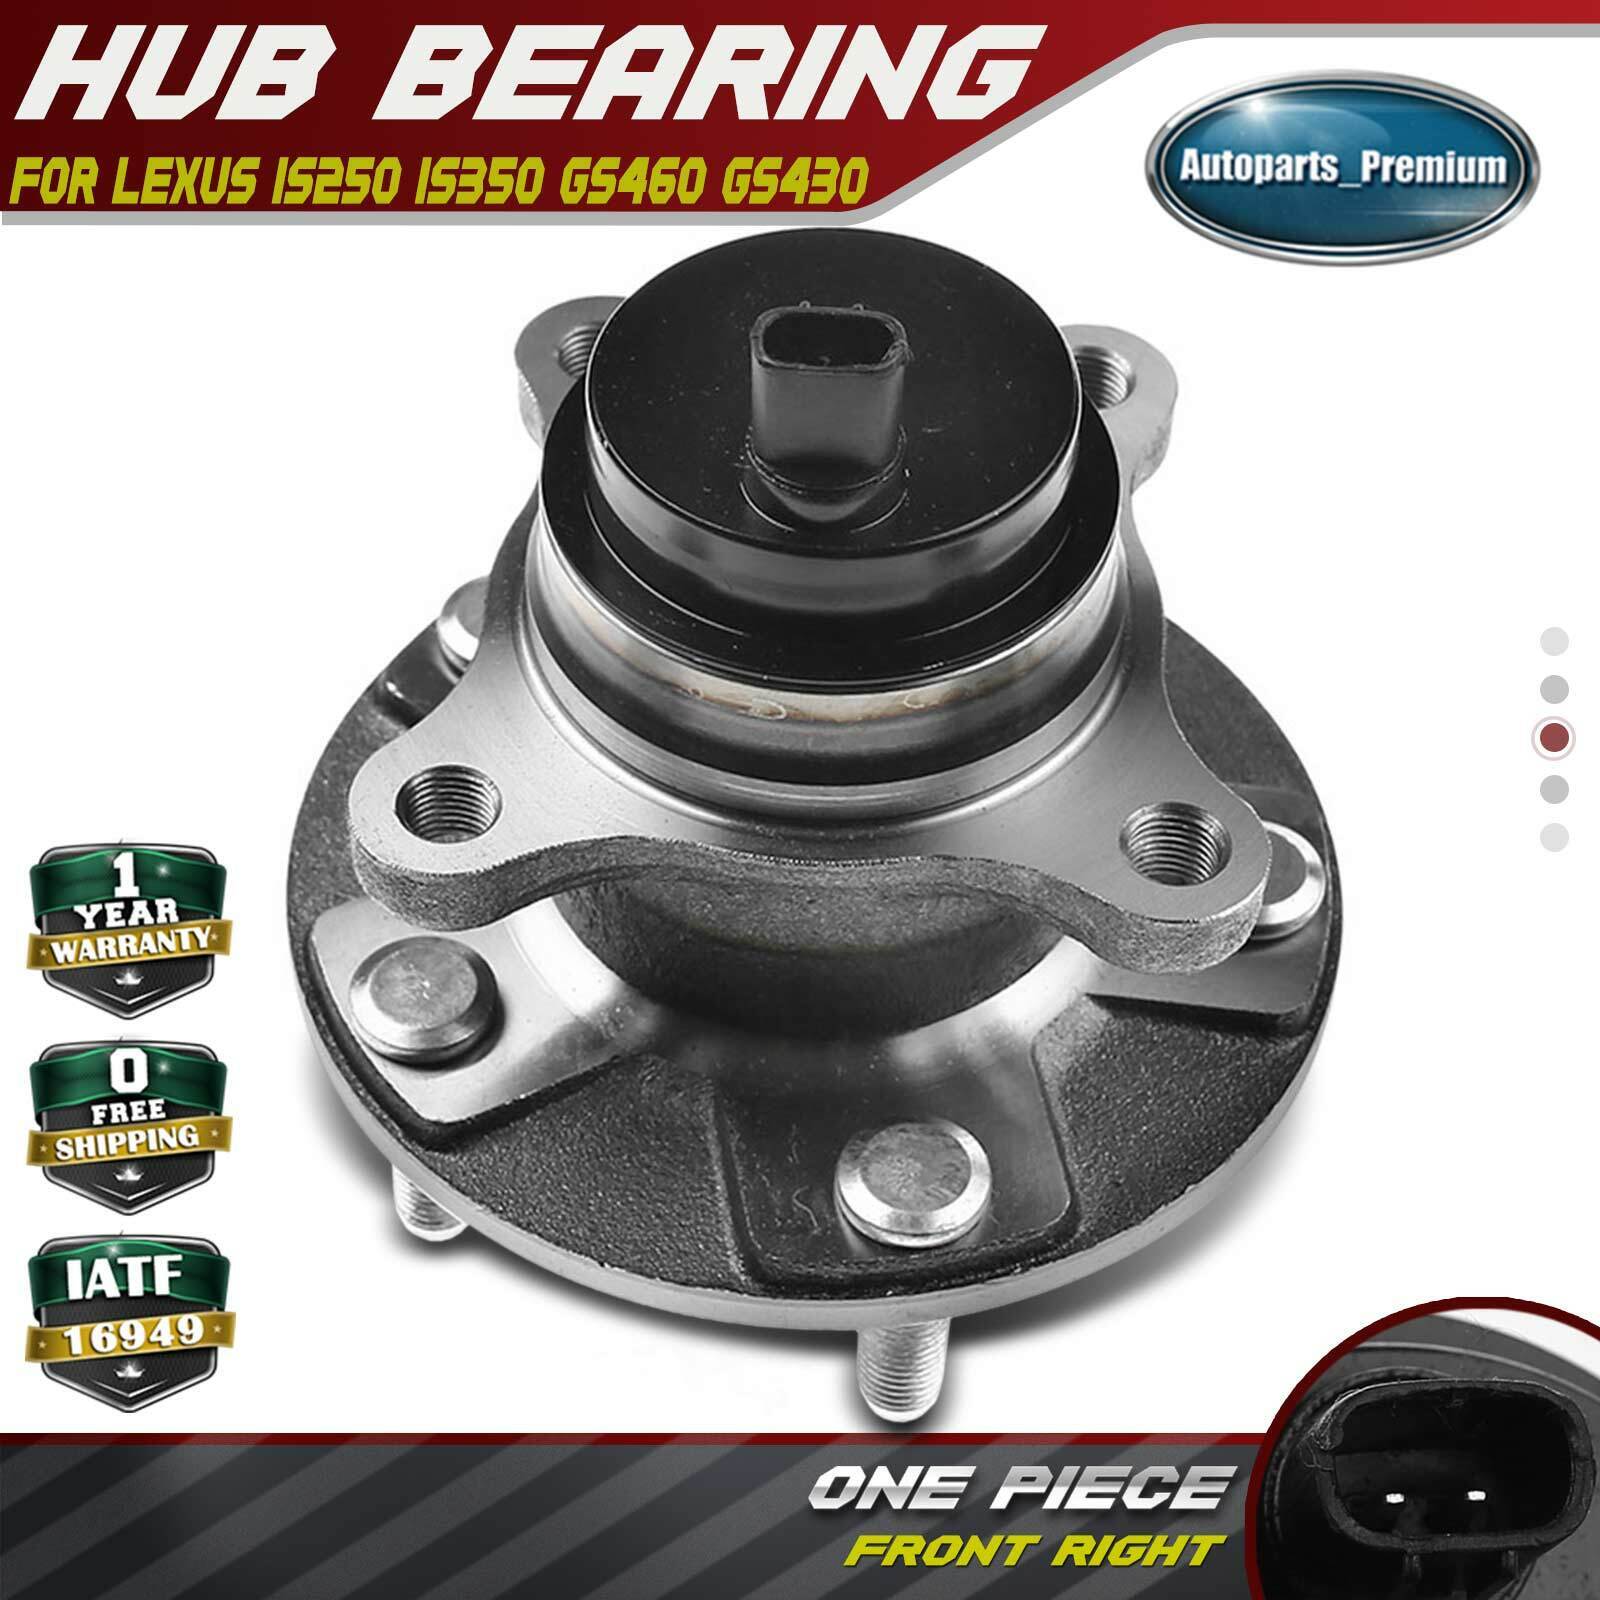 Front Passenger Wheel Bearing & Hub Assembly for Lexus IS250 IS350 GS460 GS430